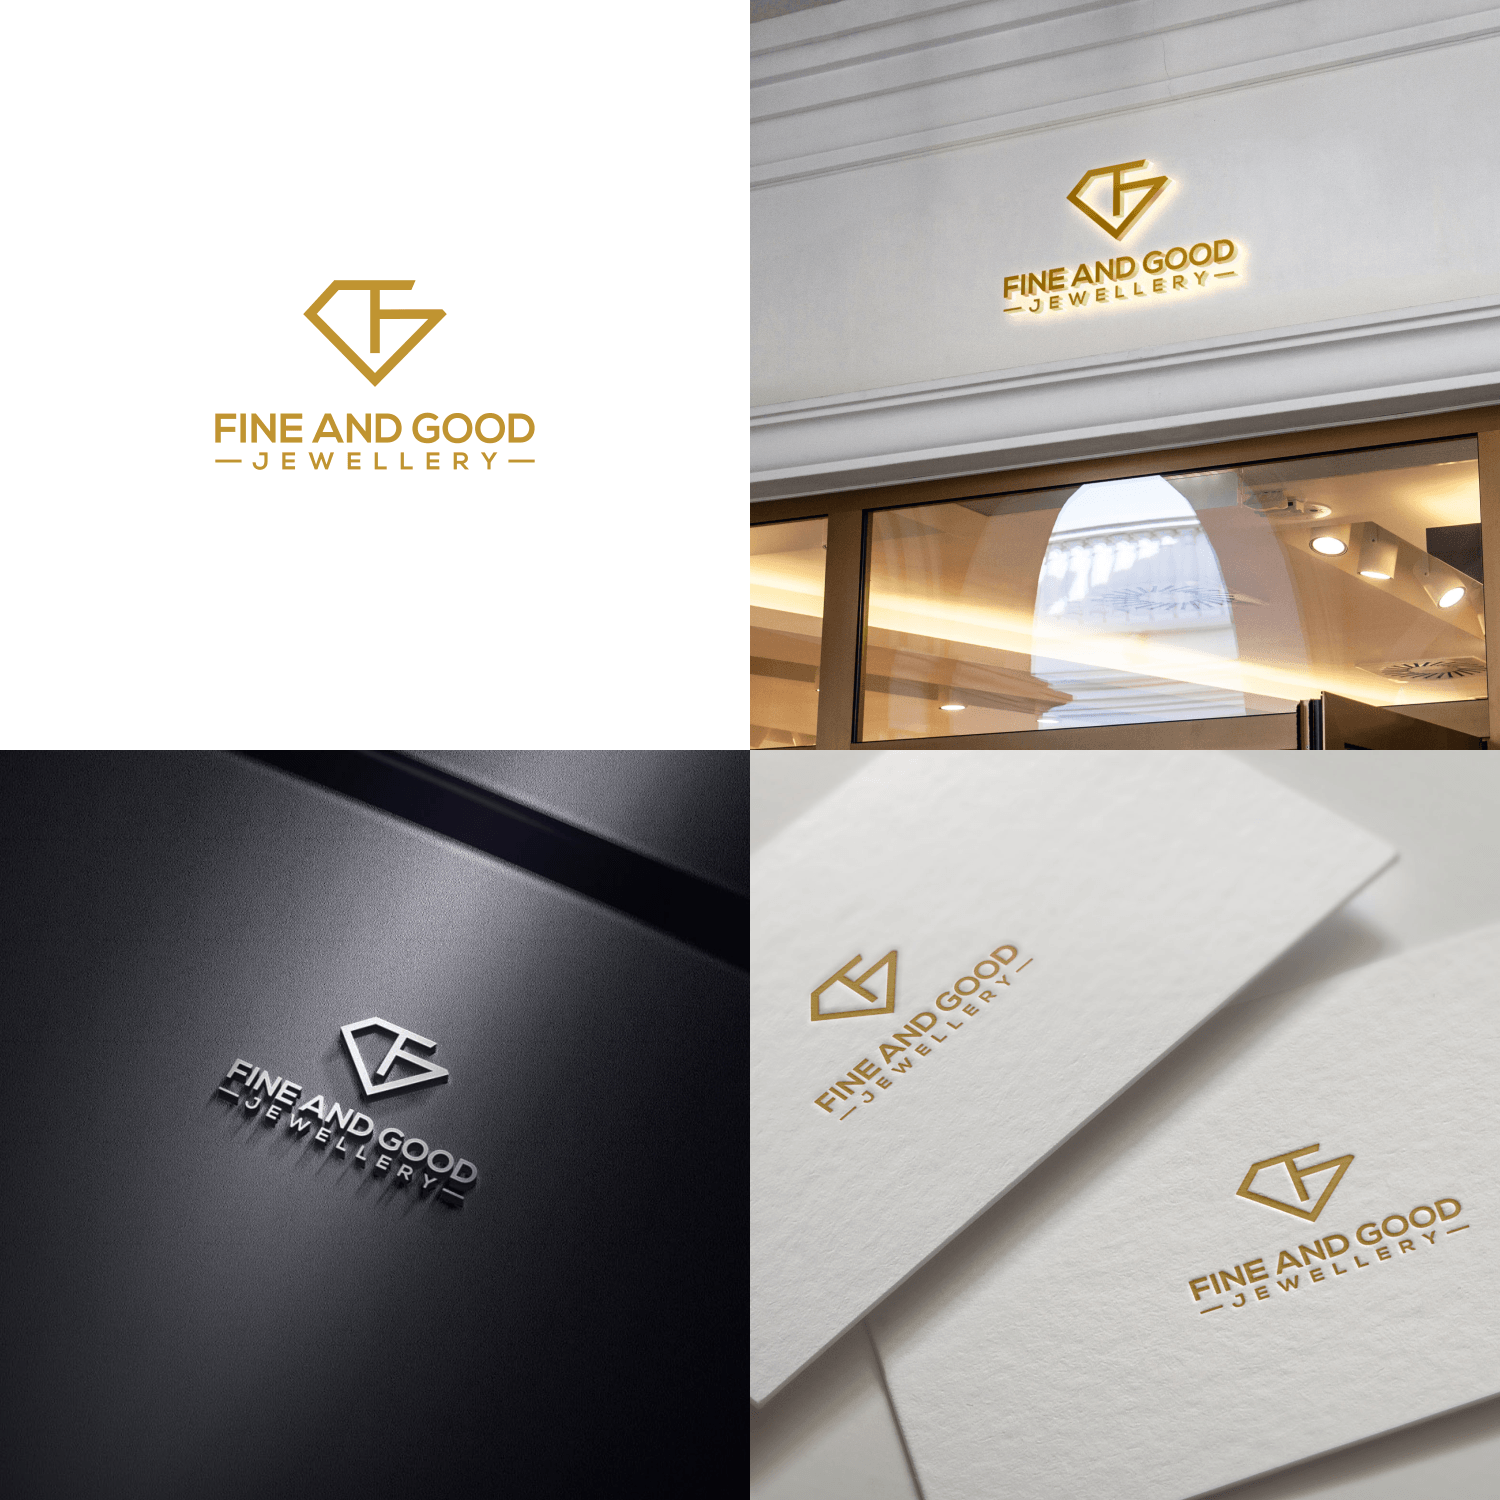 Luxury Logo - 100 Luxury Logo Ideas for Premium Products and Services